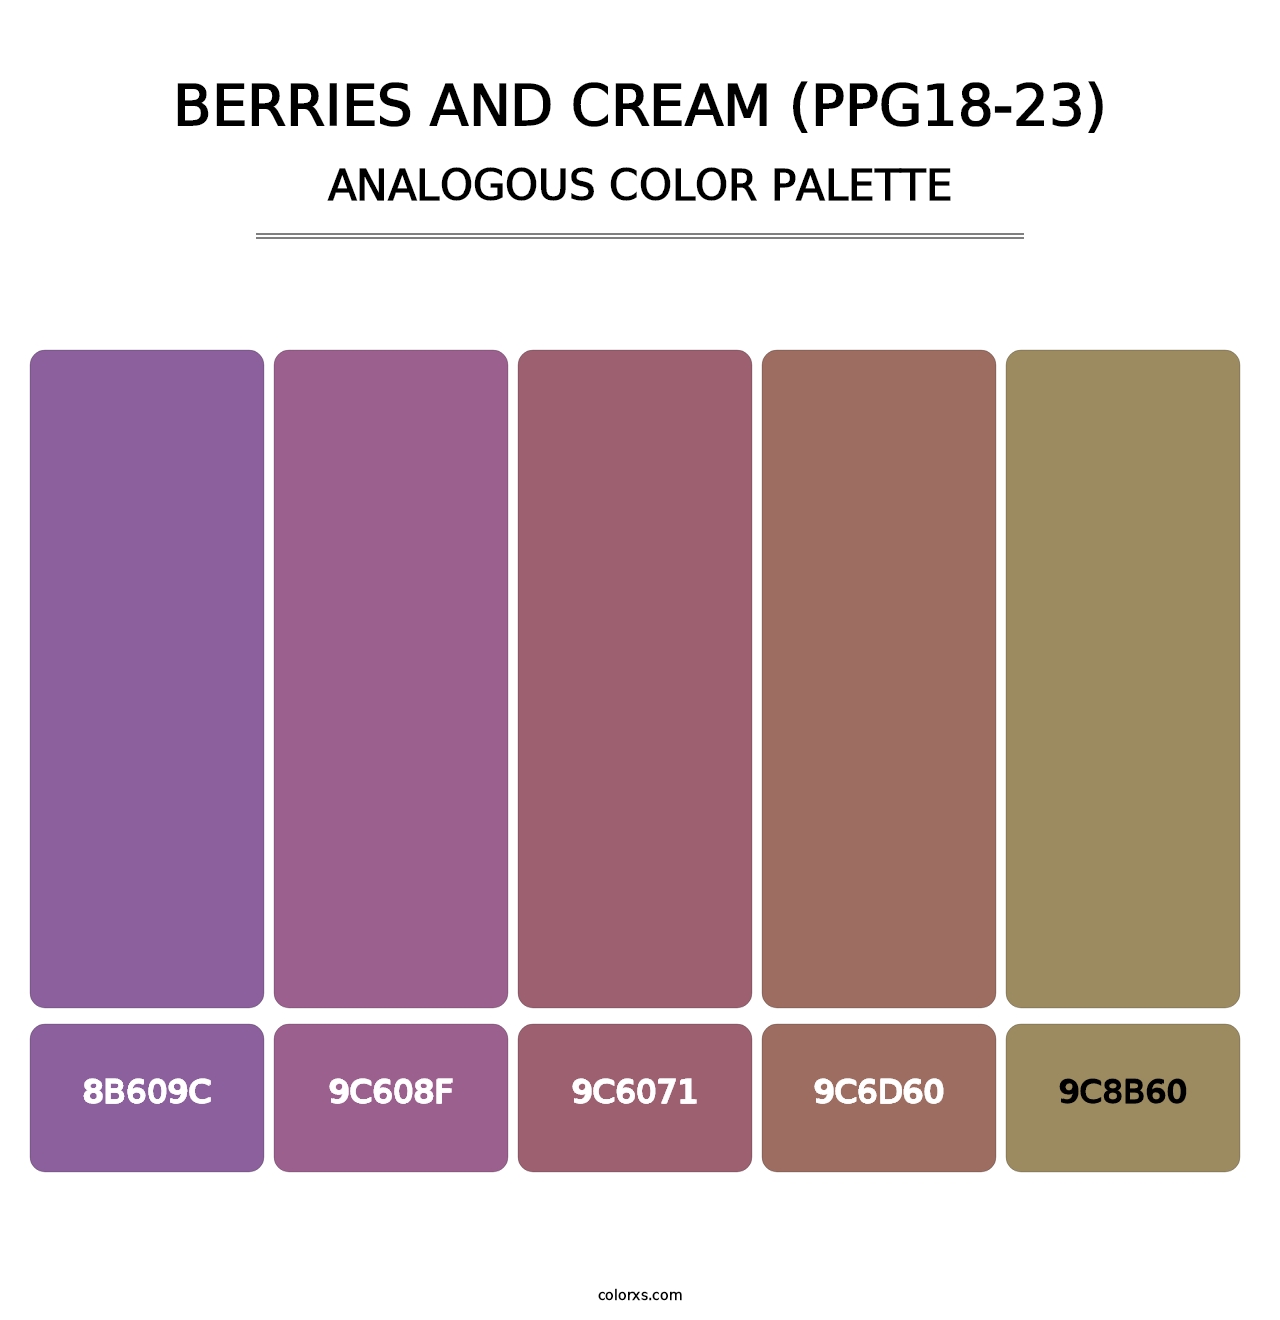 Berries And Cream (PPG18-23) - Analogous Color Palette